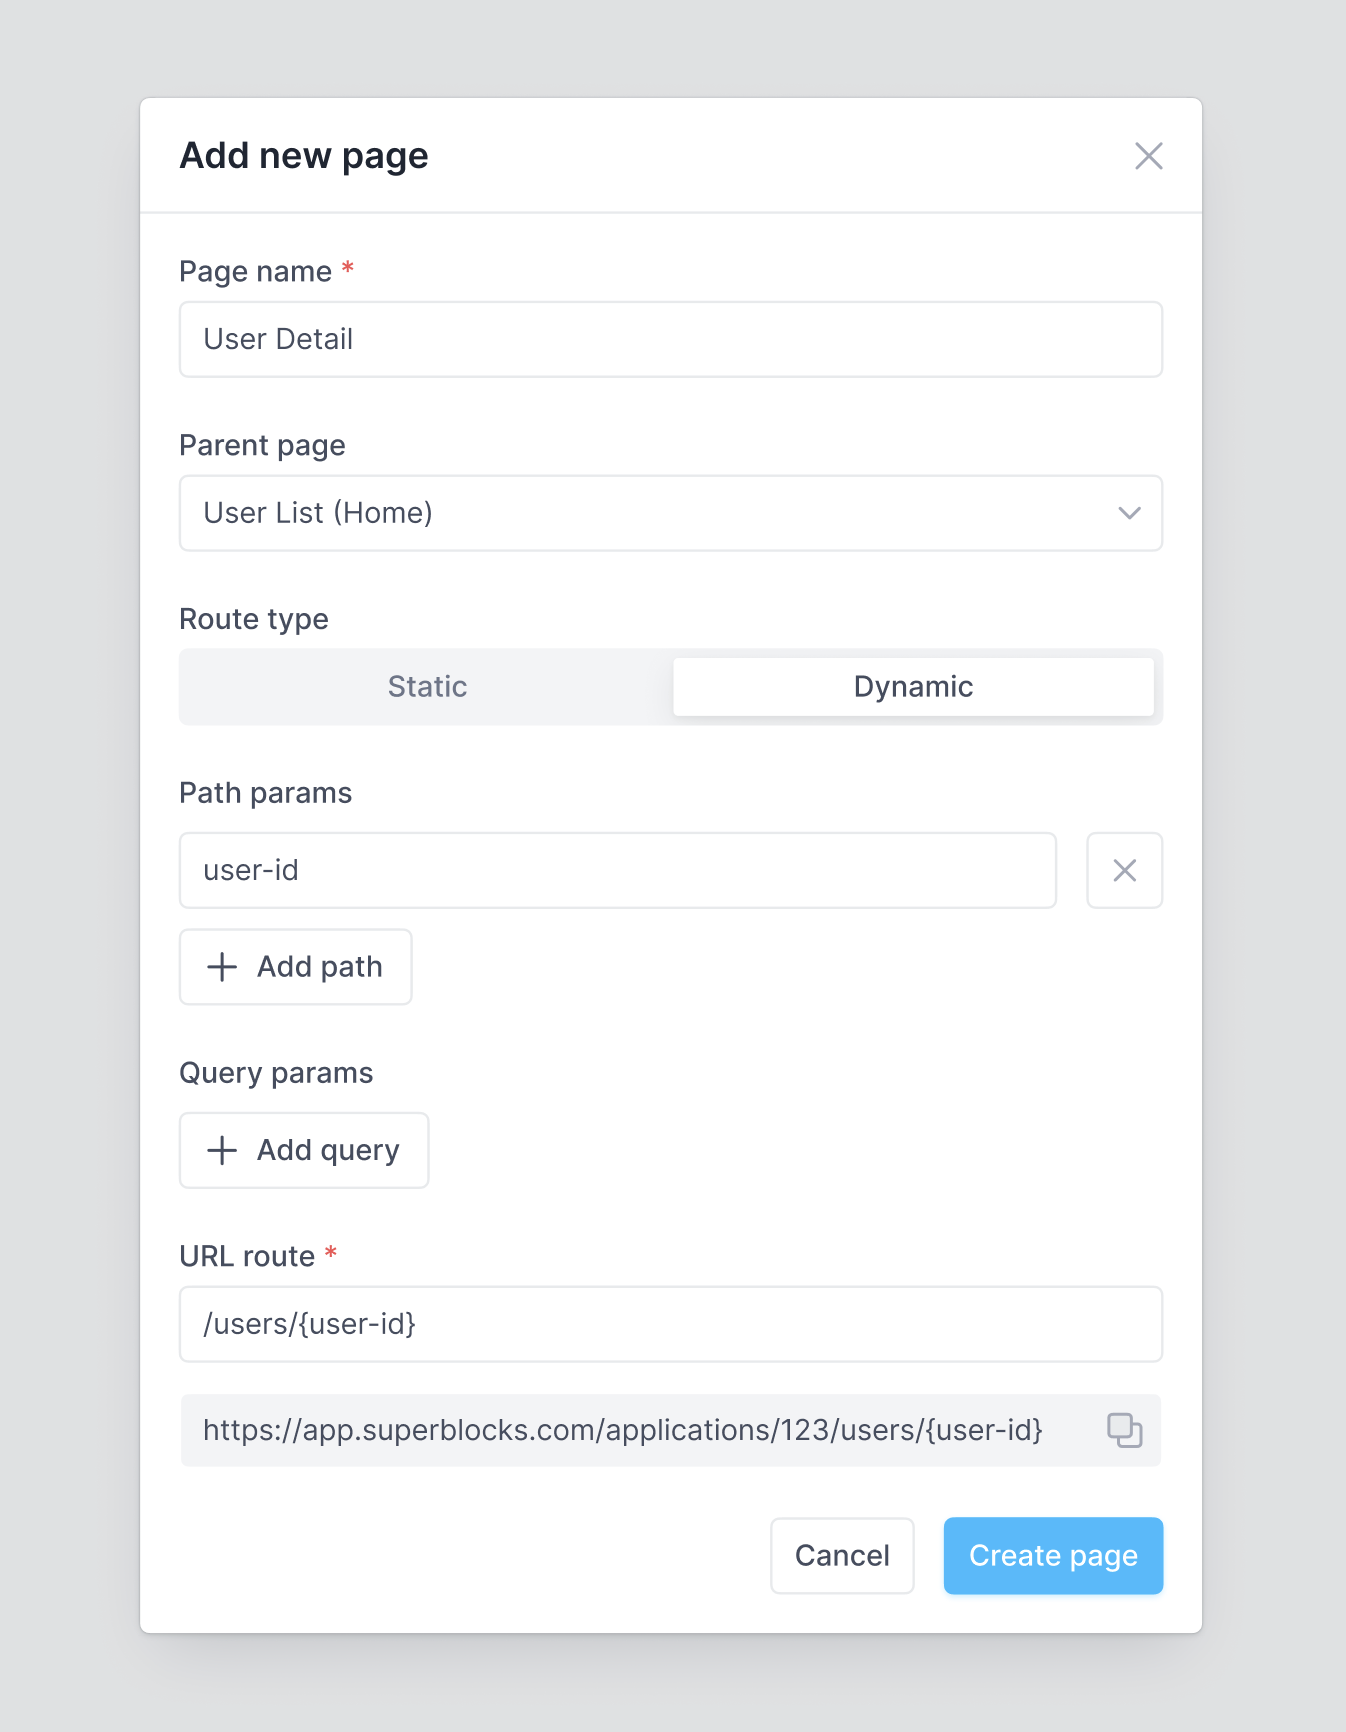 Configure the details for your new page with a dynamic route